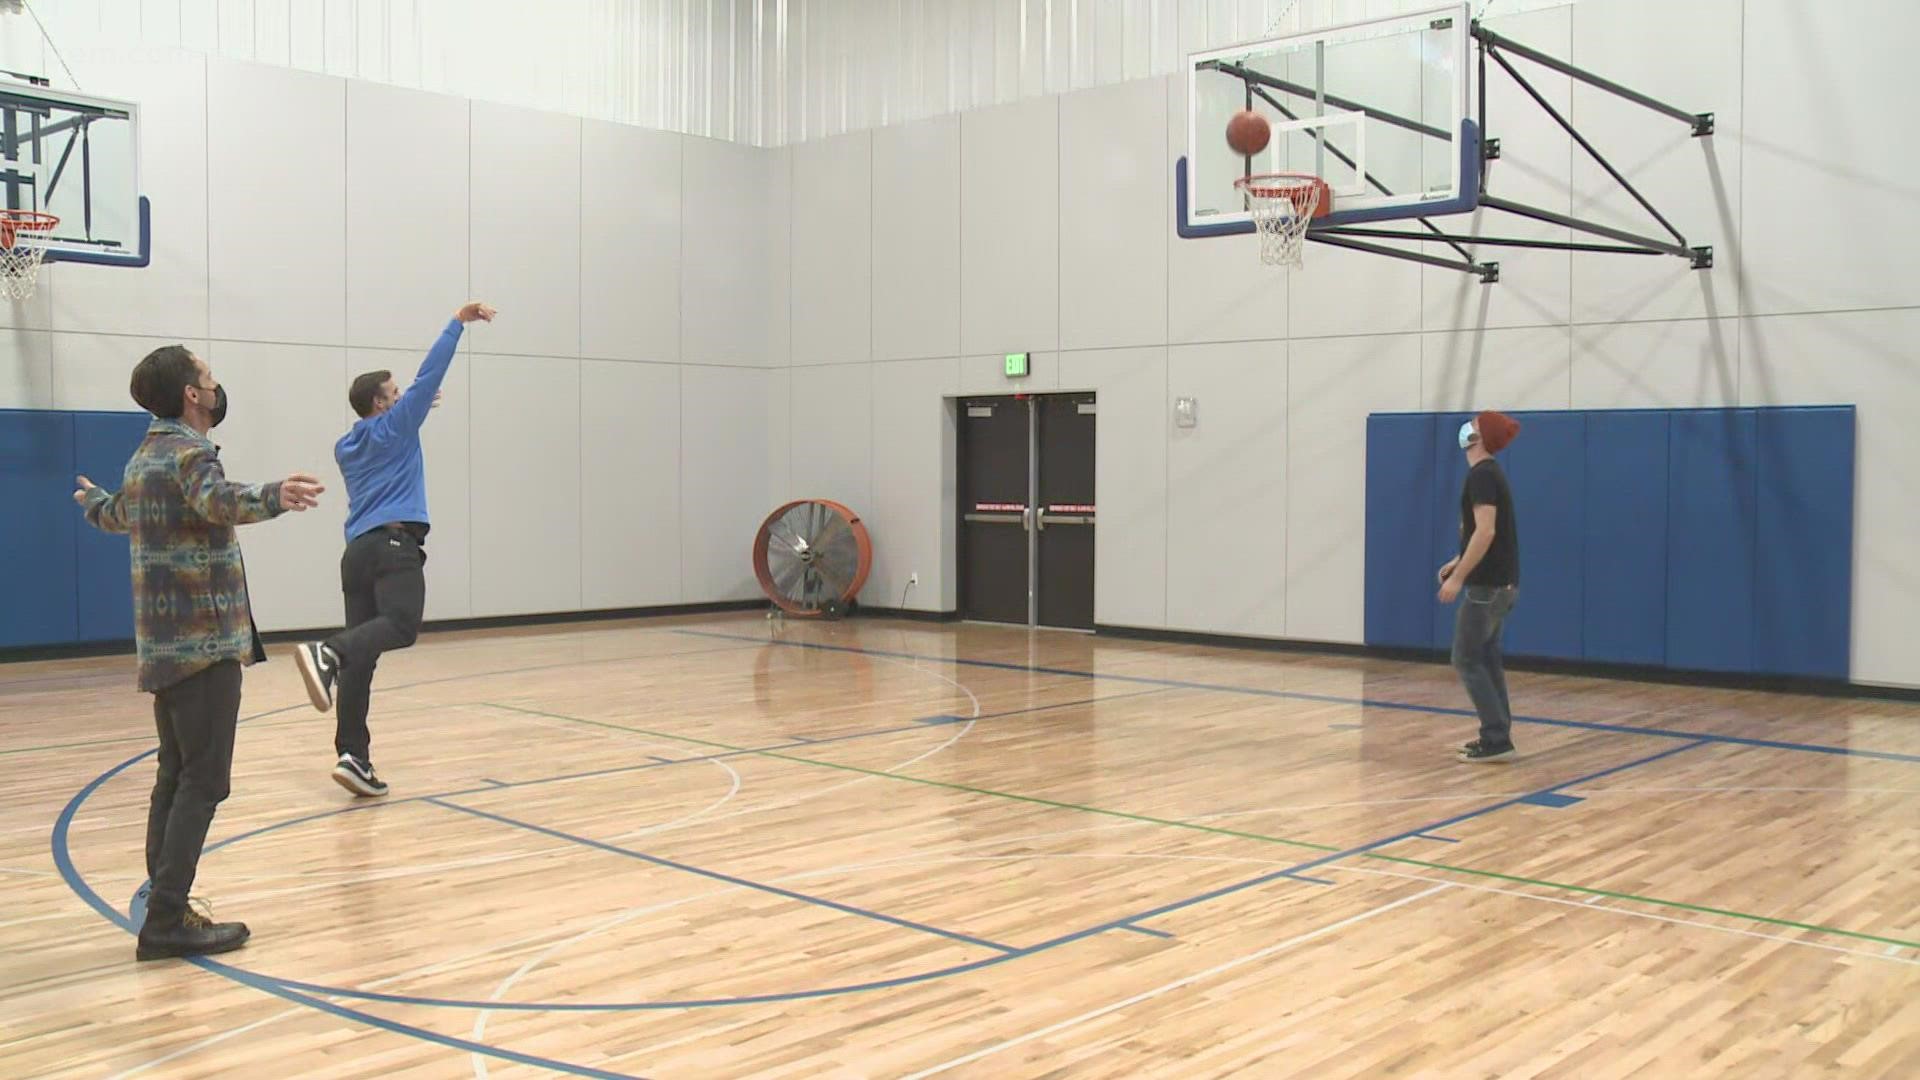 KREM 2's Jeremy LaGoo shoots some "horse" with Andy Gardner while discussing what makes the neighborhood's recreation center so loved in Airway Heights.